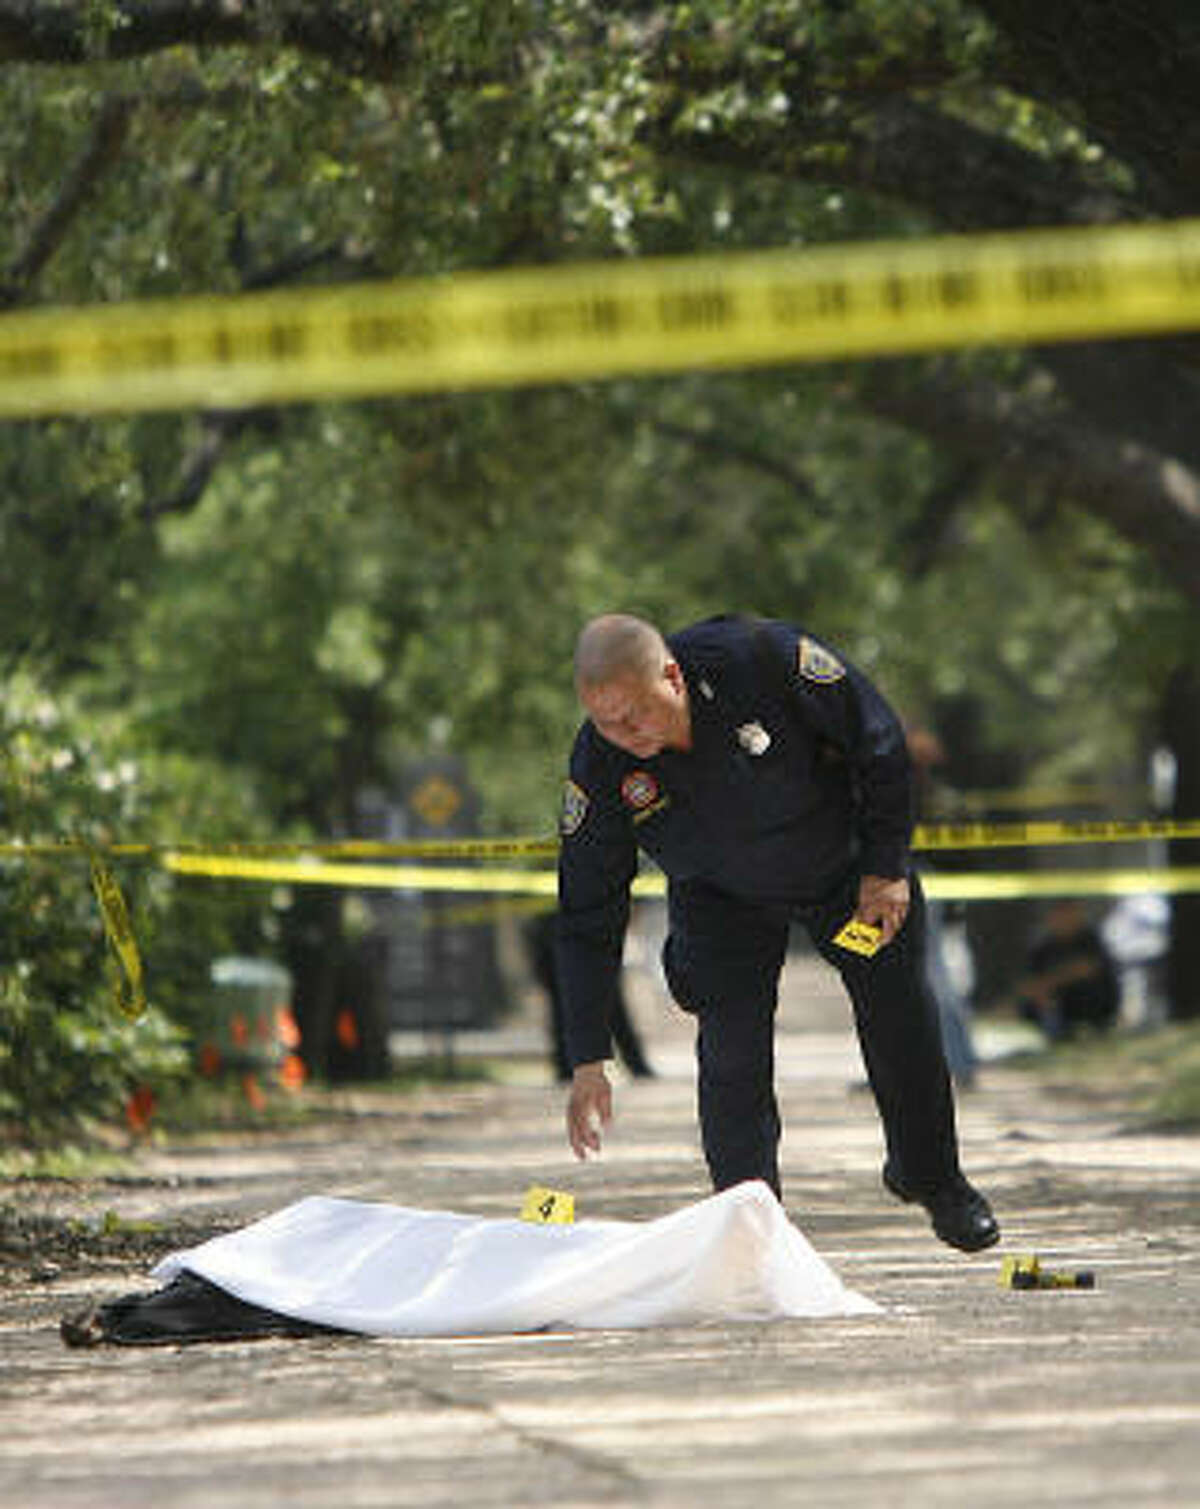 In early May, an officer examines the scene on a jogging trail near Rice University where a Metro police officer fatally shot a man resisting arrest on an assault complaint.﻿